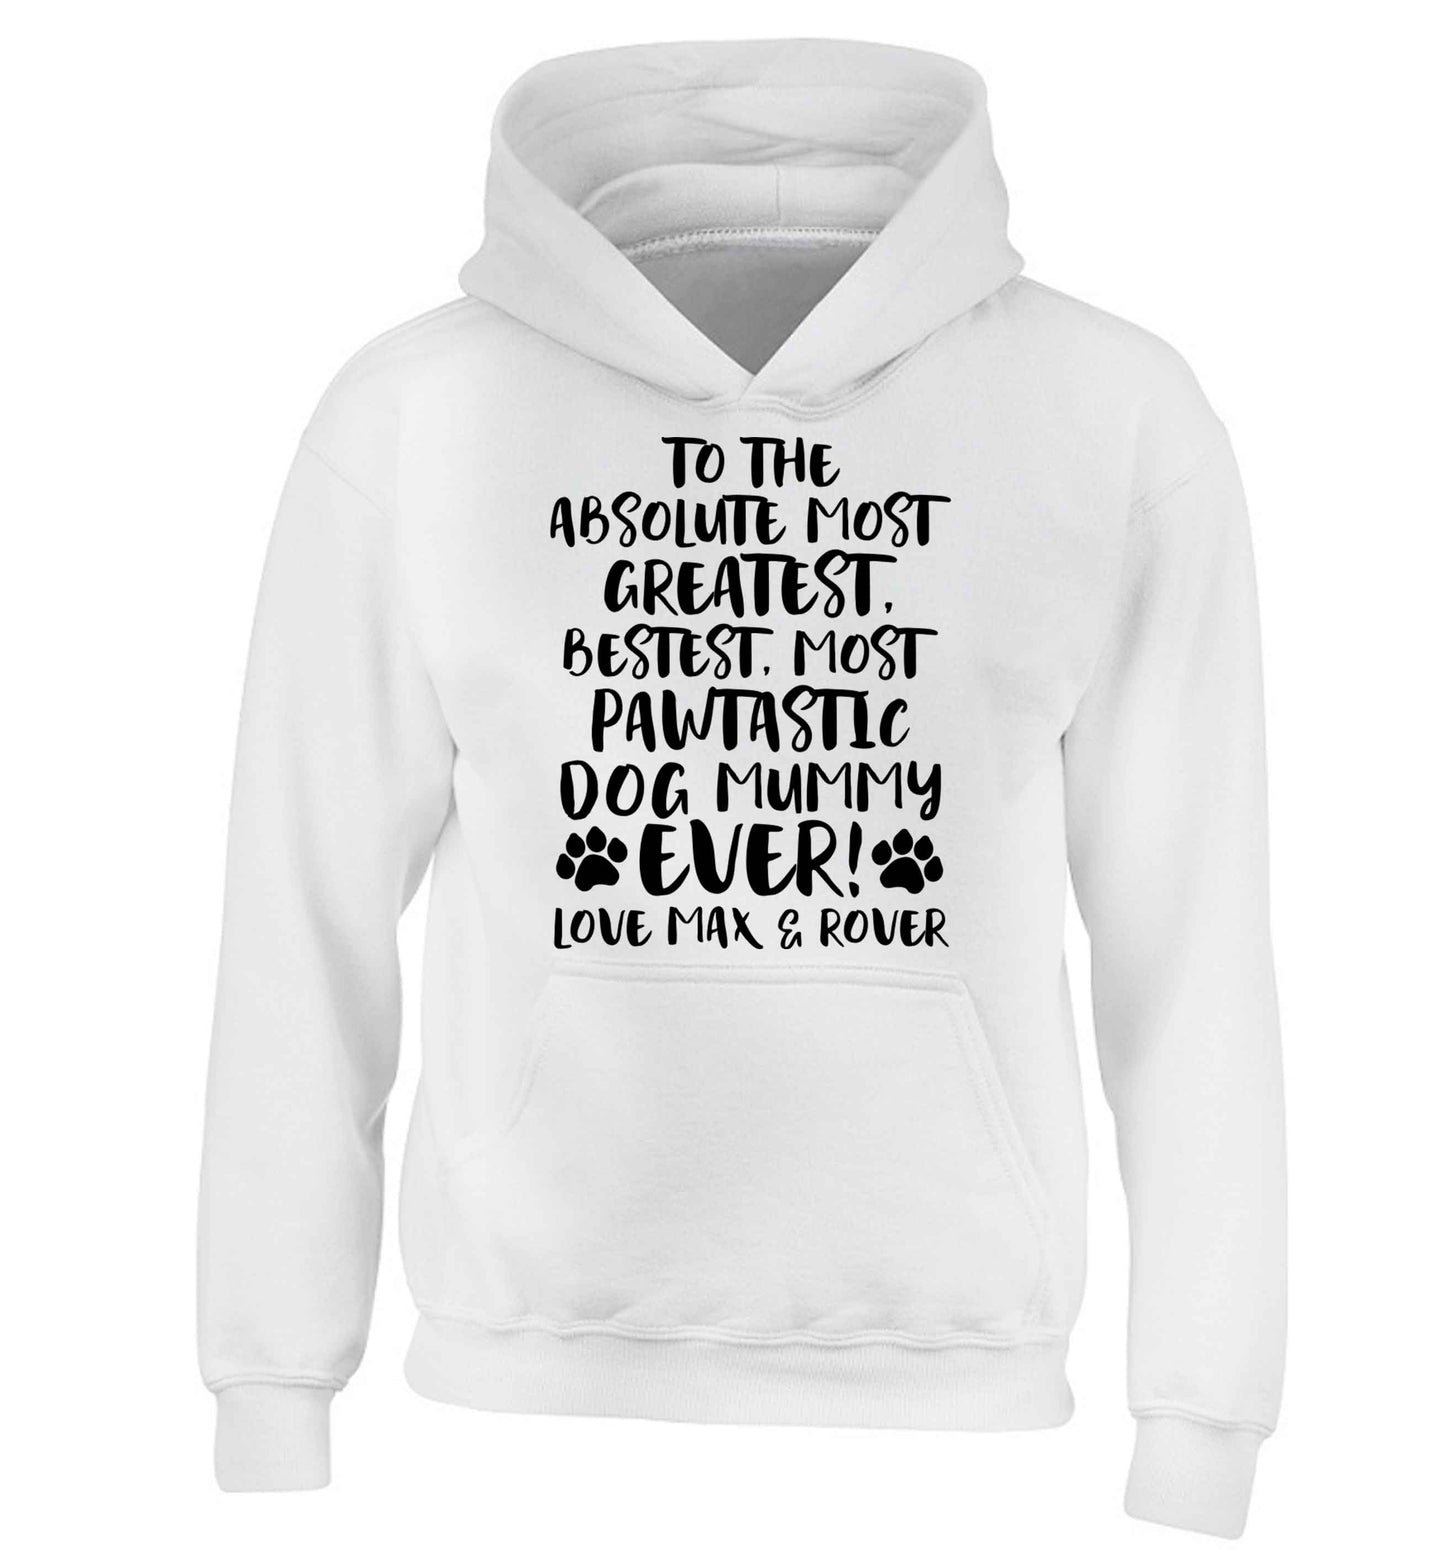 Personalsied to the most pawtastic dog mummy ever children's white hoodie 12-13 Years